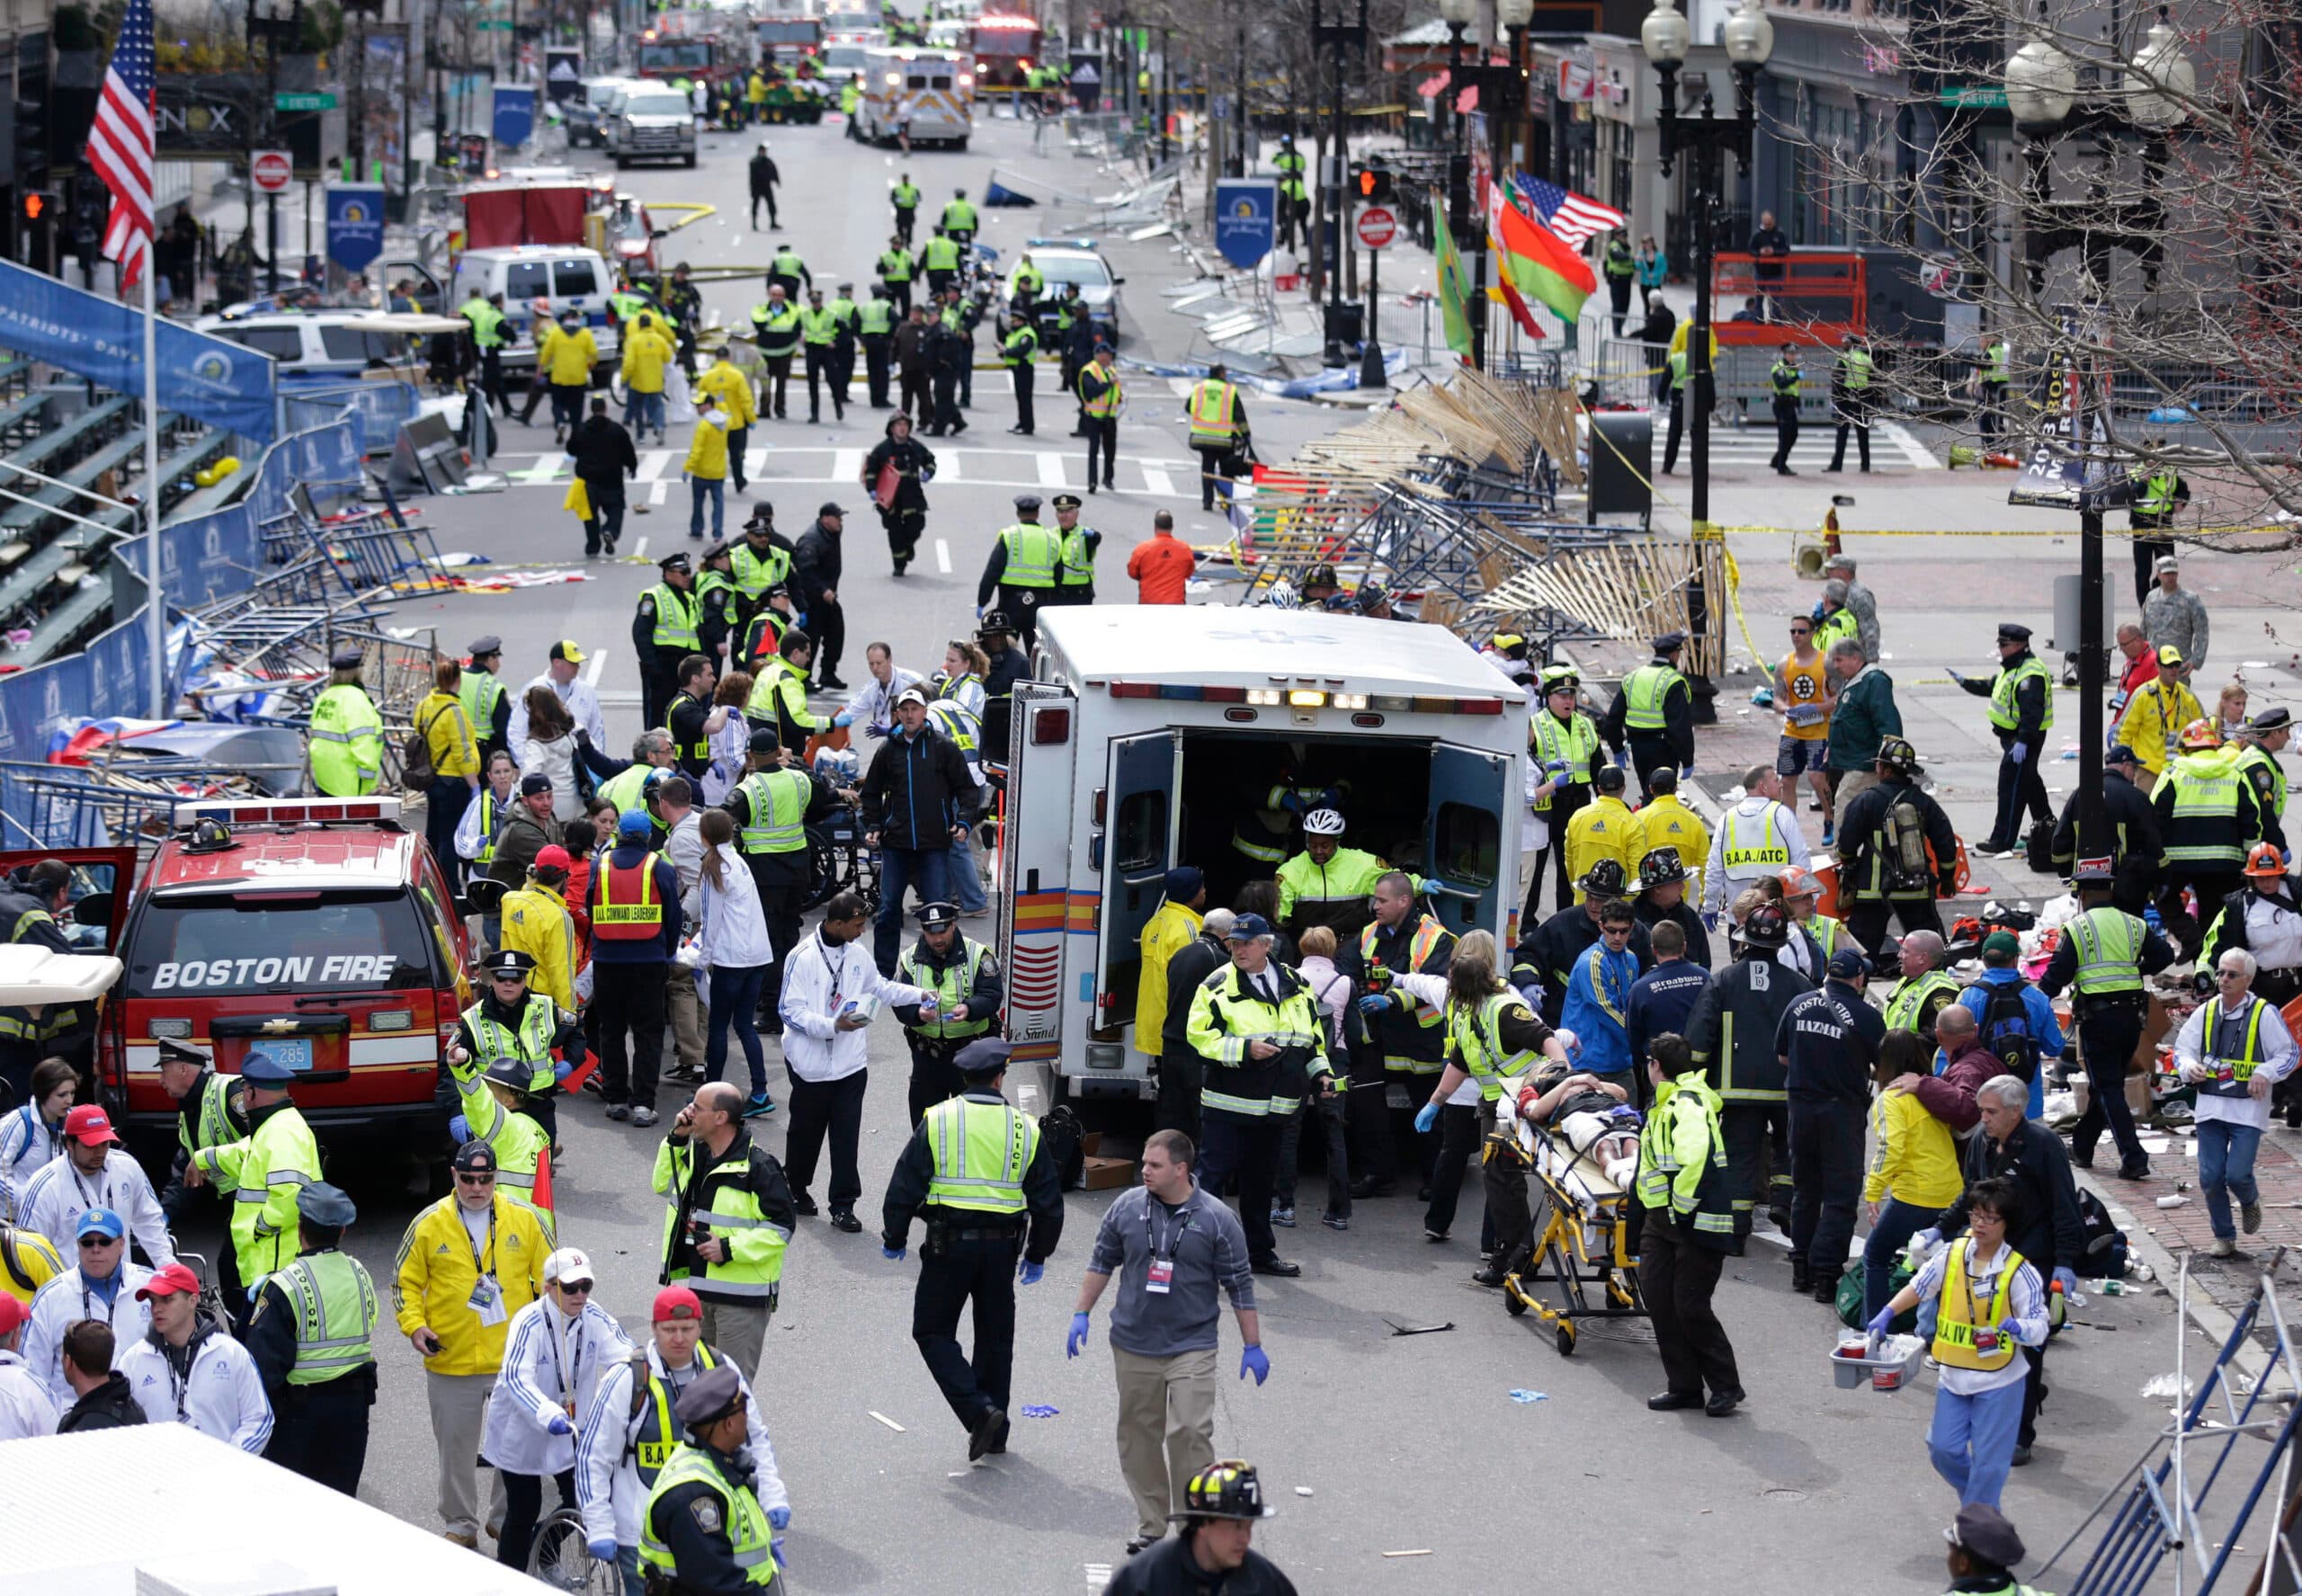 In this 2013 file photo, medical workers rush around an ambulance to treat people wounded after the Boston Marathon bombings. (Charles Krupa/AP)